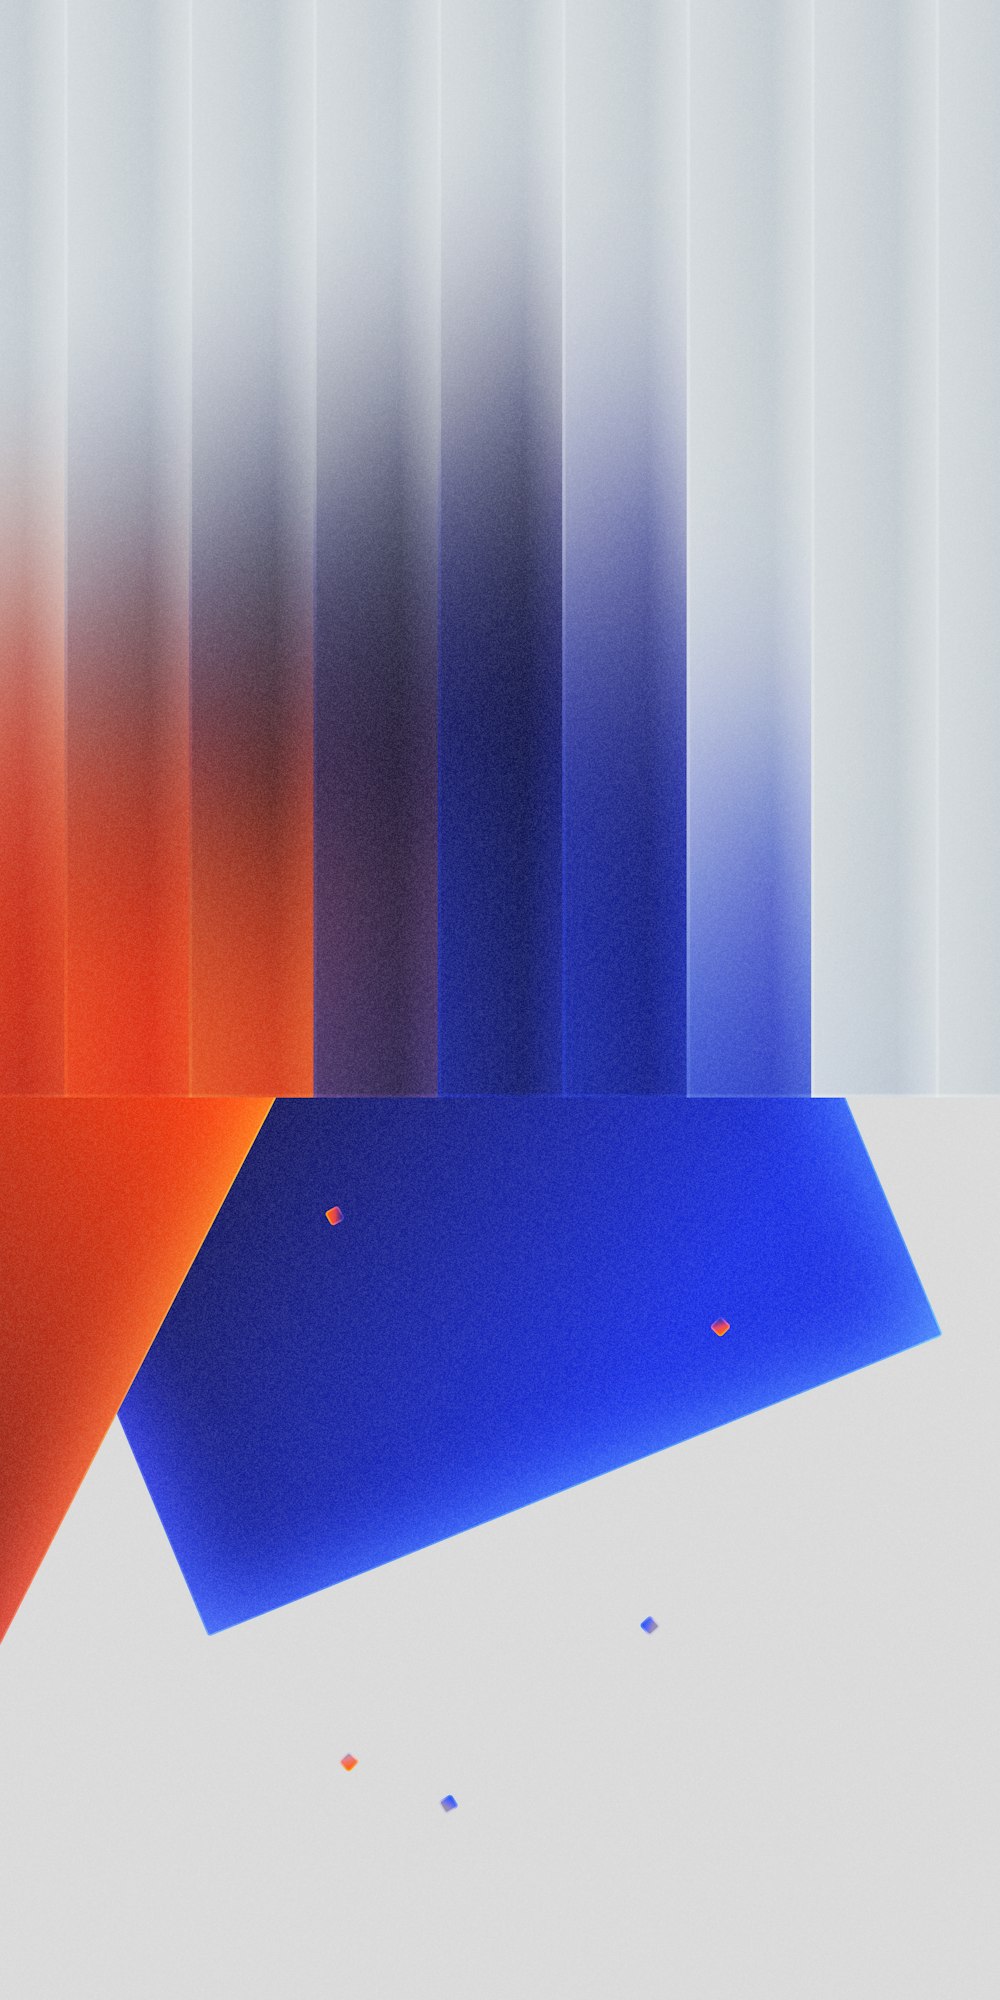 an abstract painting of blue, orange, and red shapes